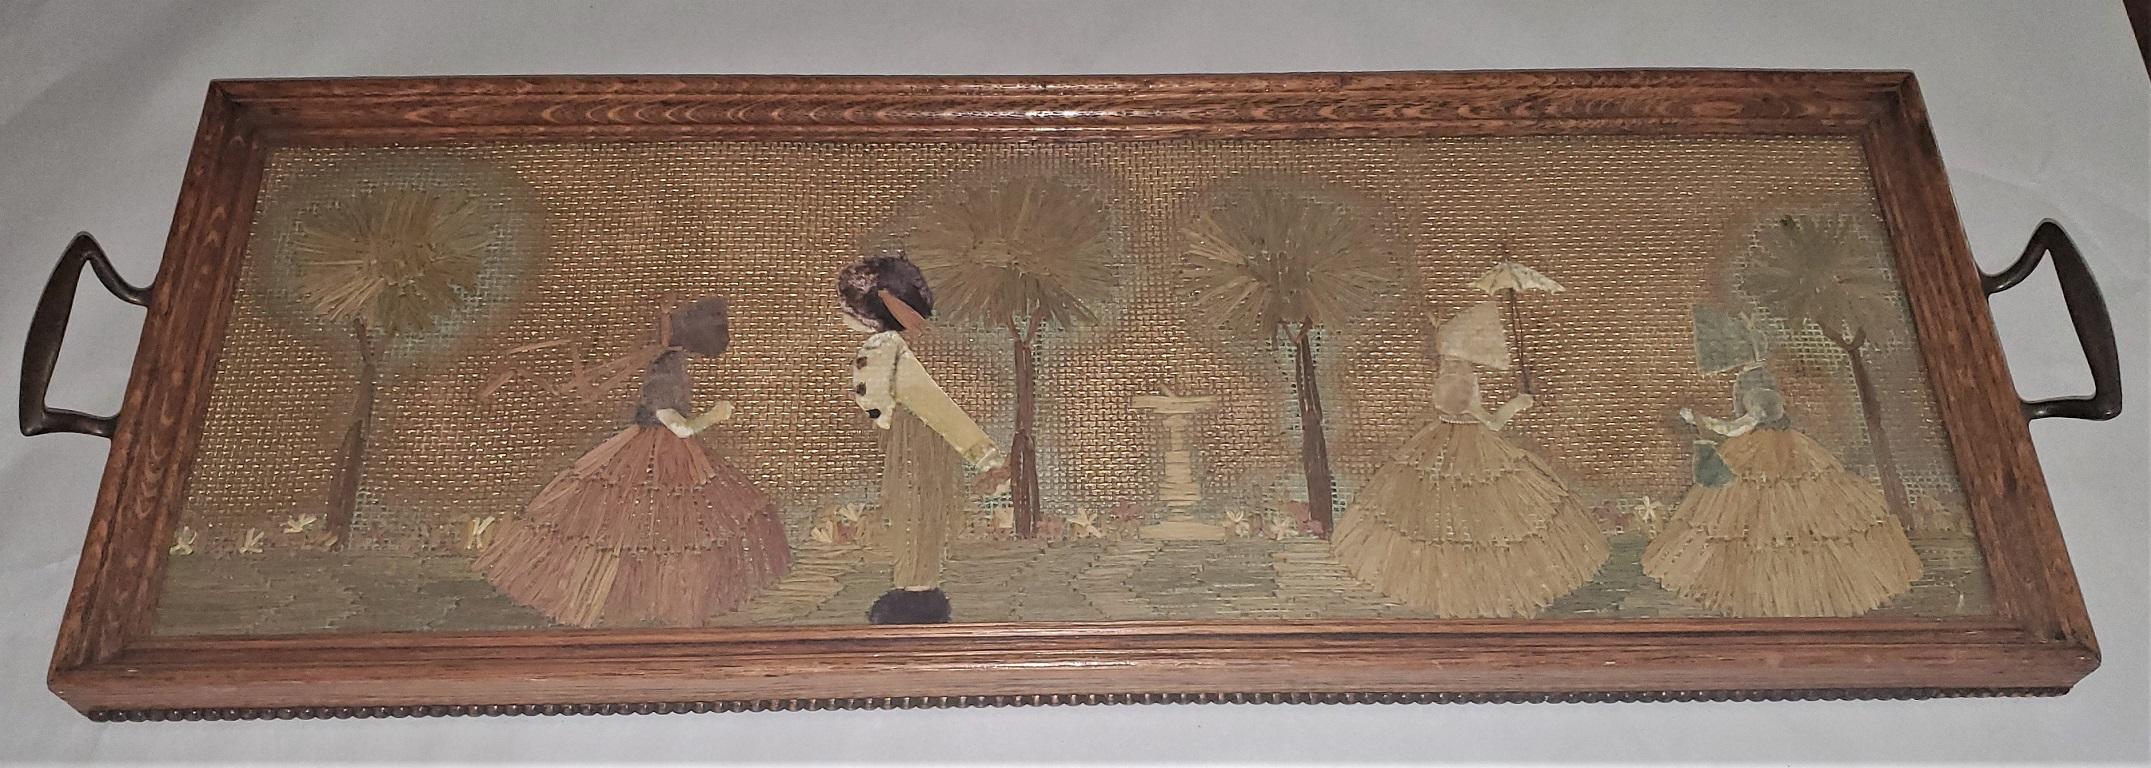 Presenting a gorgeously rare regency straw and felt sampler serving tray.

English from the Regency Era and the Time of Jane Austen’, 1795-1815.

This original ‘Sampler’ is made of a gilt and hand painted lattice work fabric mounted on board. It